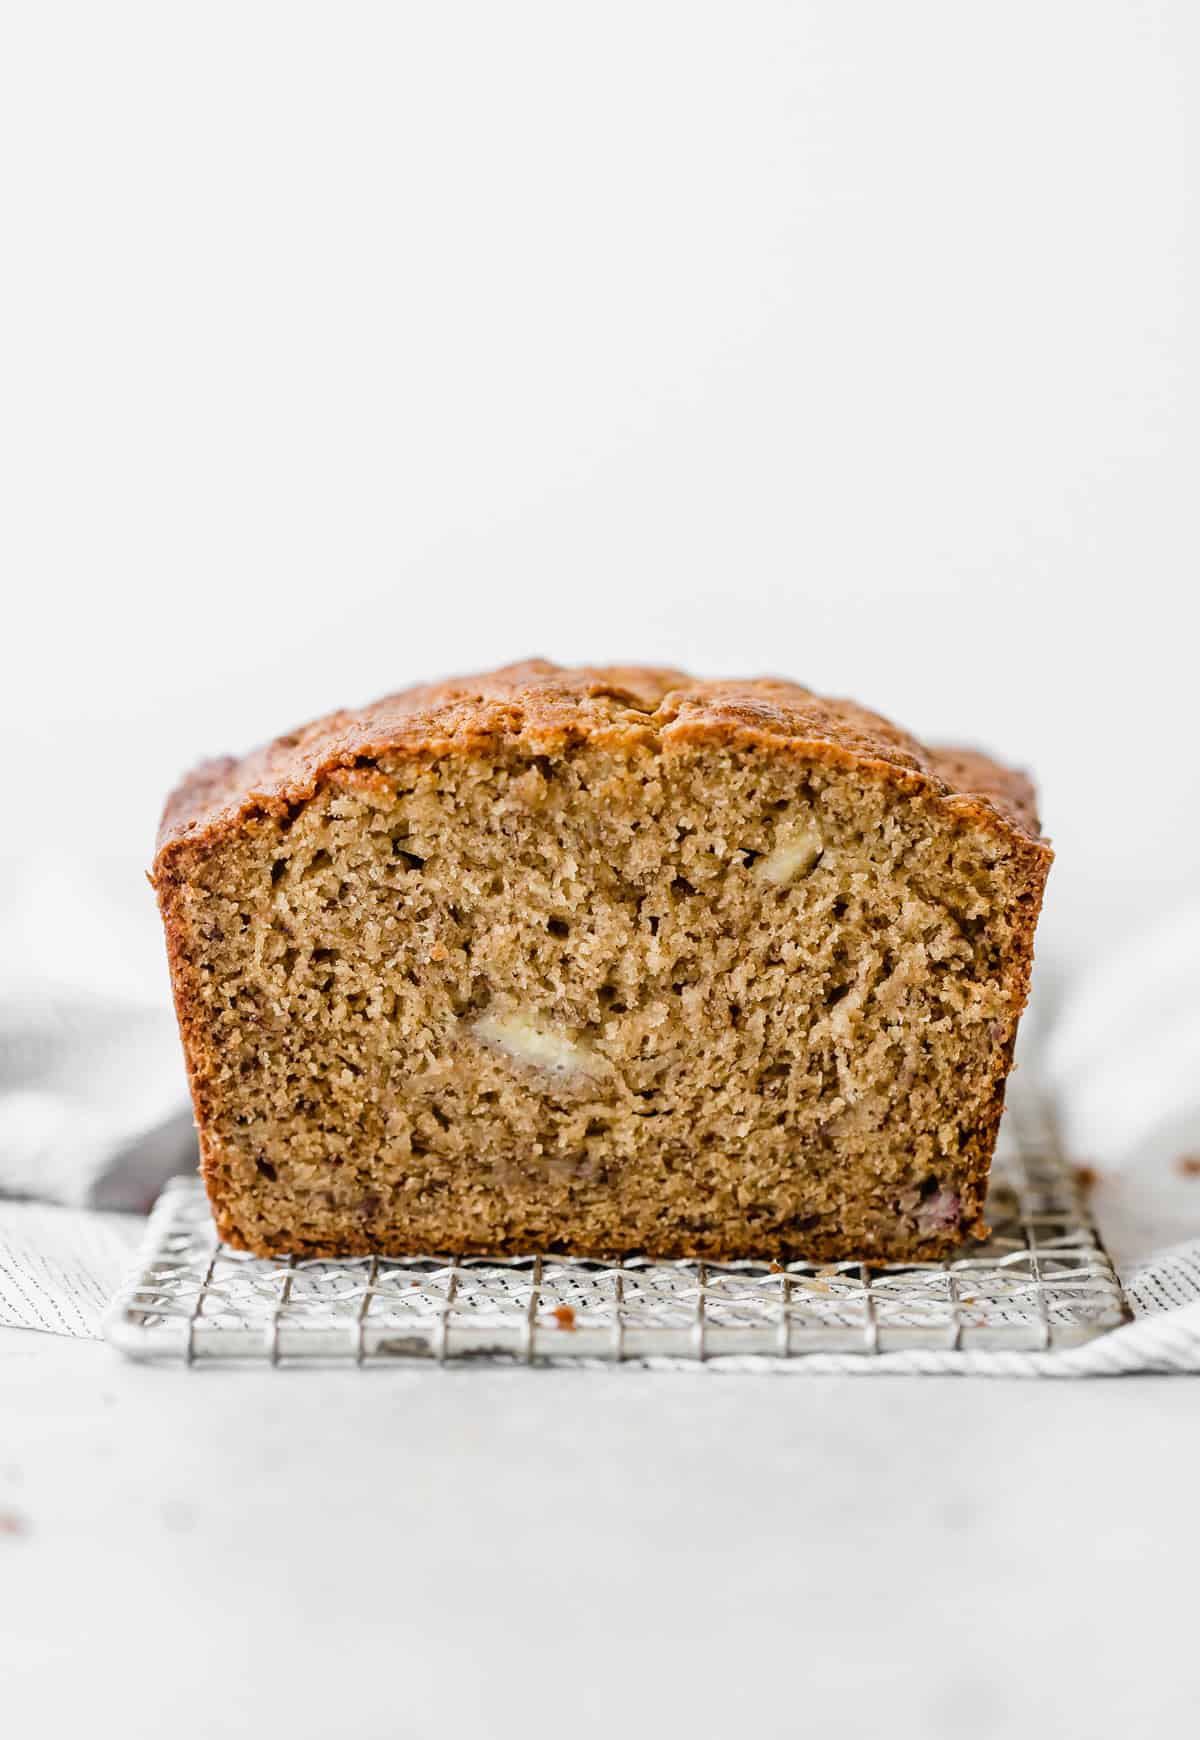 A load of Banana Bread that on a small wire rack against a white background.